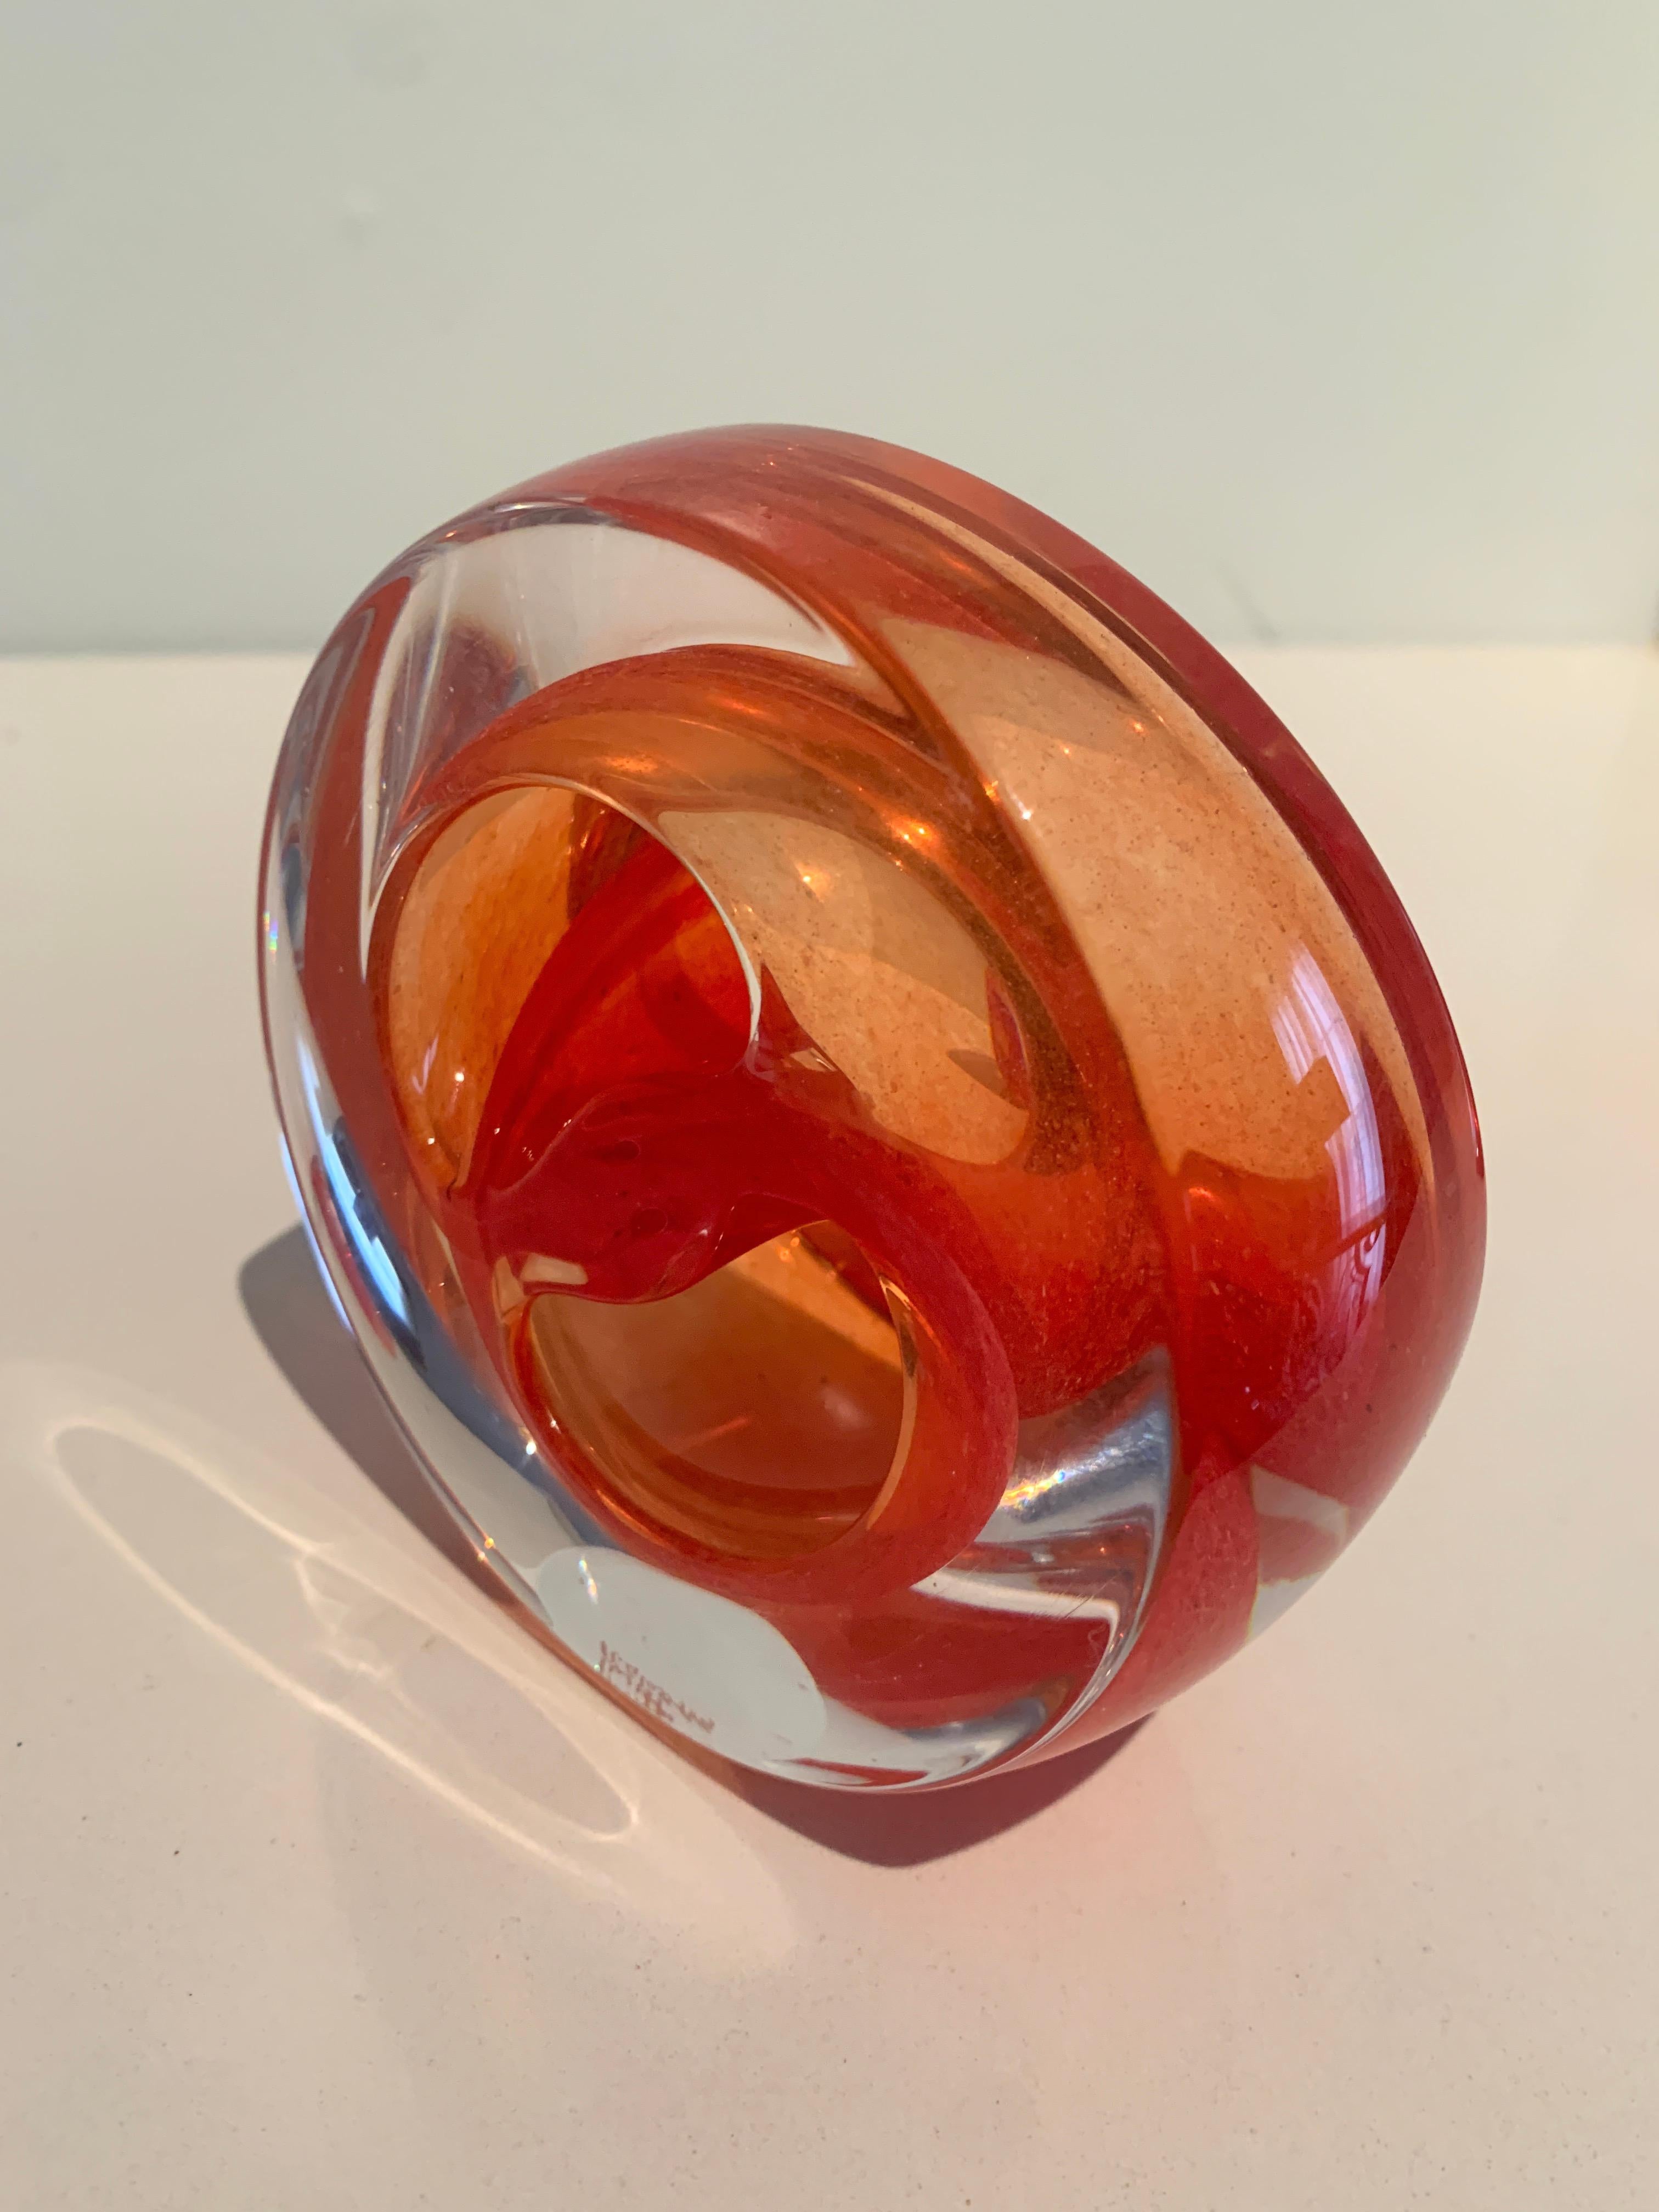 A wonderful hand blown art glass sculpture from Teign Valley Glass in England. The shop has been around since the early 20th C. and is renowned for it's glass work... this piece is a wonderful abstract round piece. We have a mate to this one, please